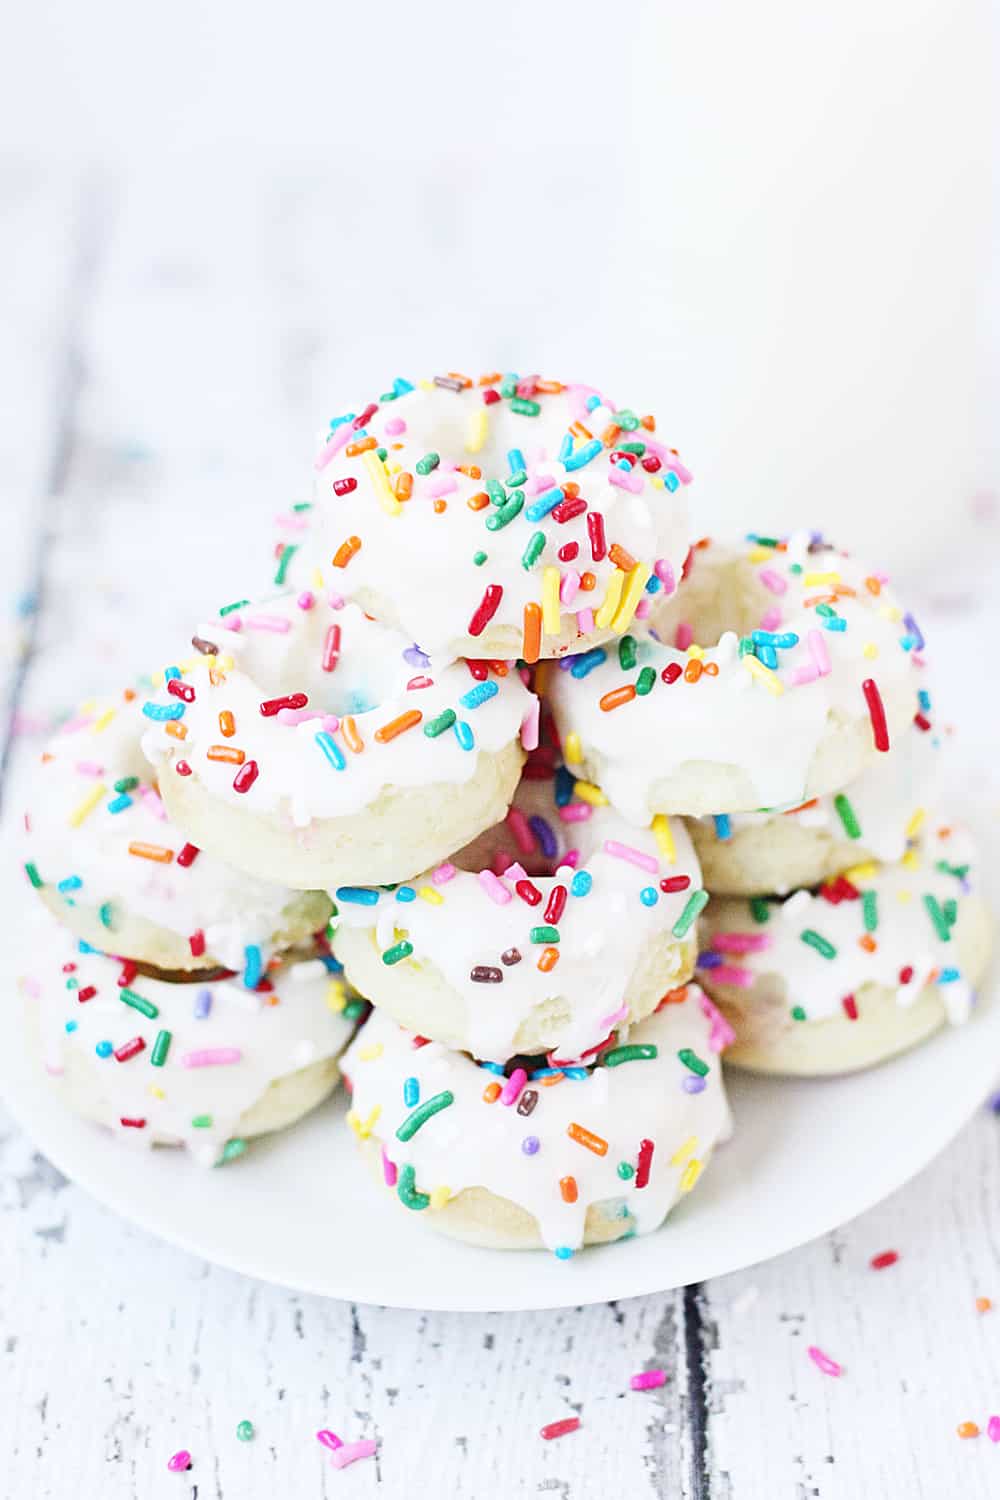 Mini Funfetti Cake Mix Donuts with Vanilla Glaze --Mini funfetti cake mix donuts are the perfect party treat! Topped with a vanilla glaze and colorful sprinkles, these mini donuts from cake mix are not only super cute but also super easy! #donuts #doughnut #cakemix #dessert #funfetti #bakeddonuts #recipe #dessert #cakemixrecipe 